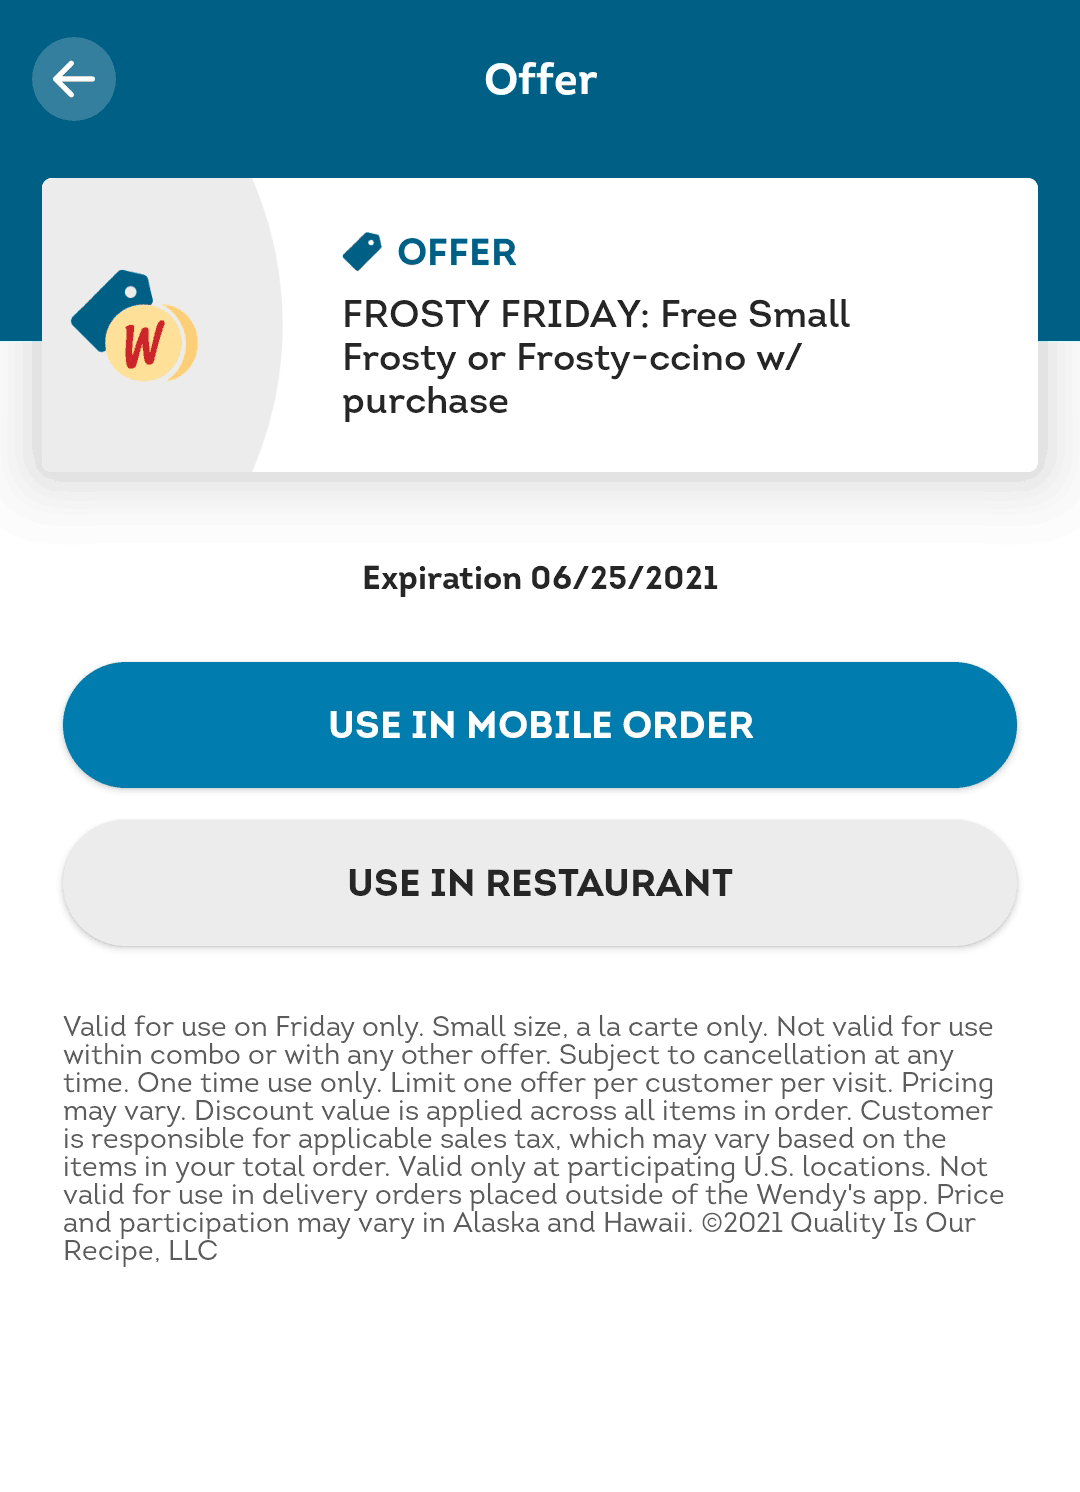 Free frosty with any purchase Fridays this month at Wendys restaurants